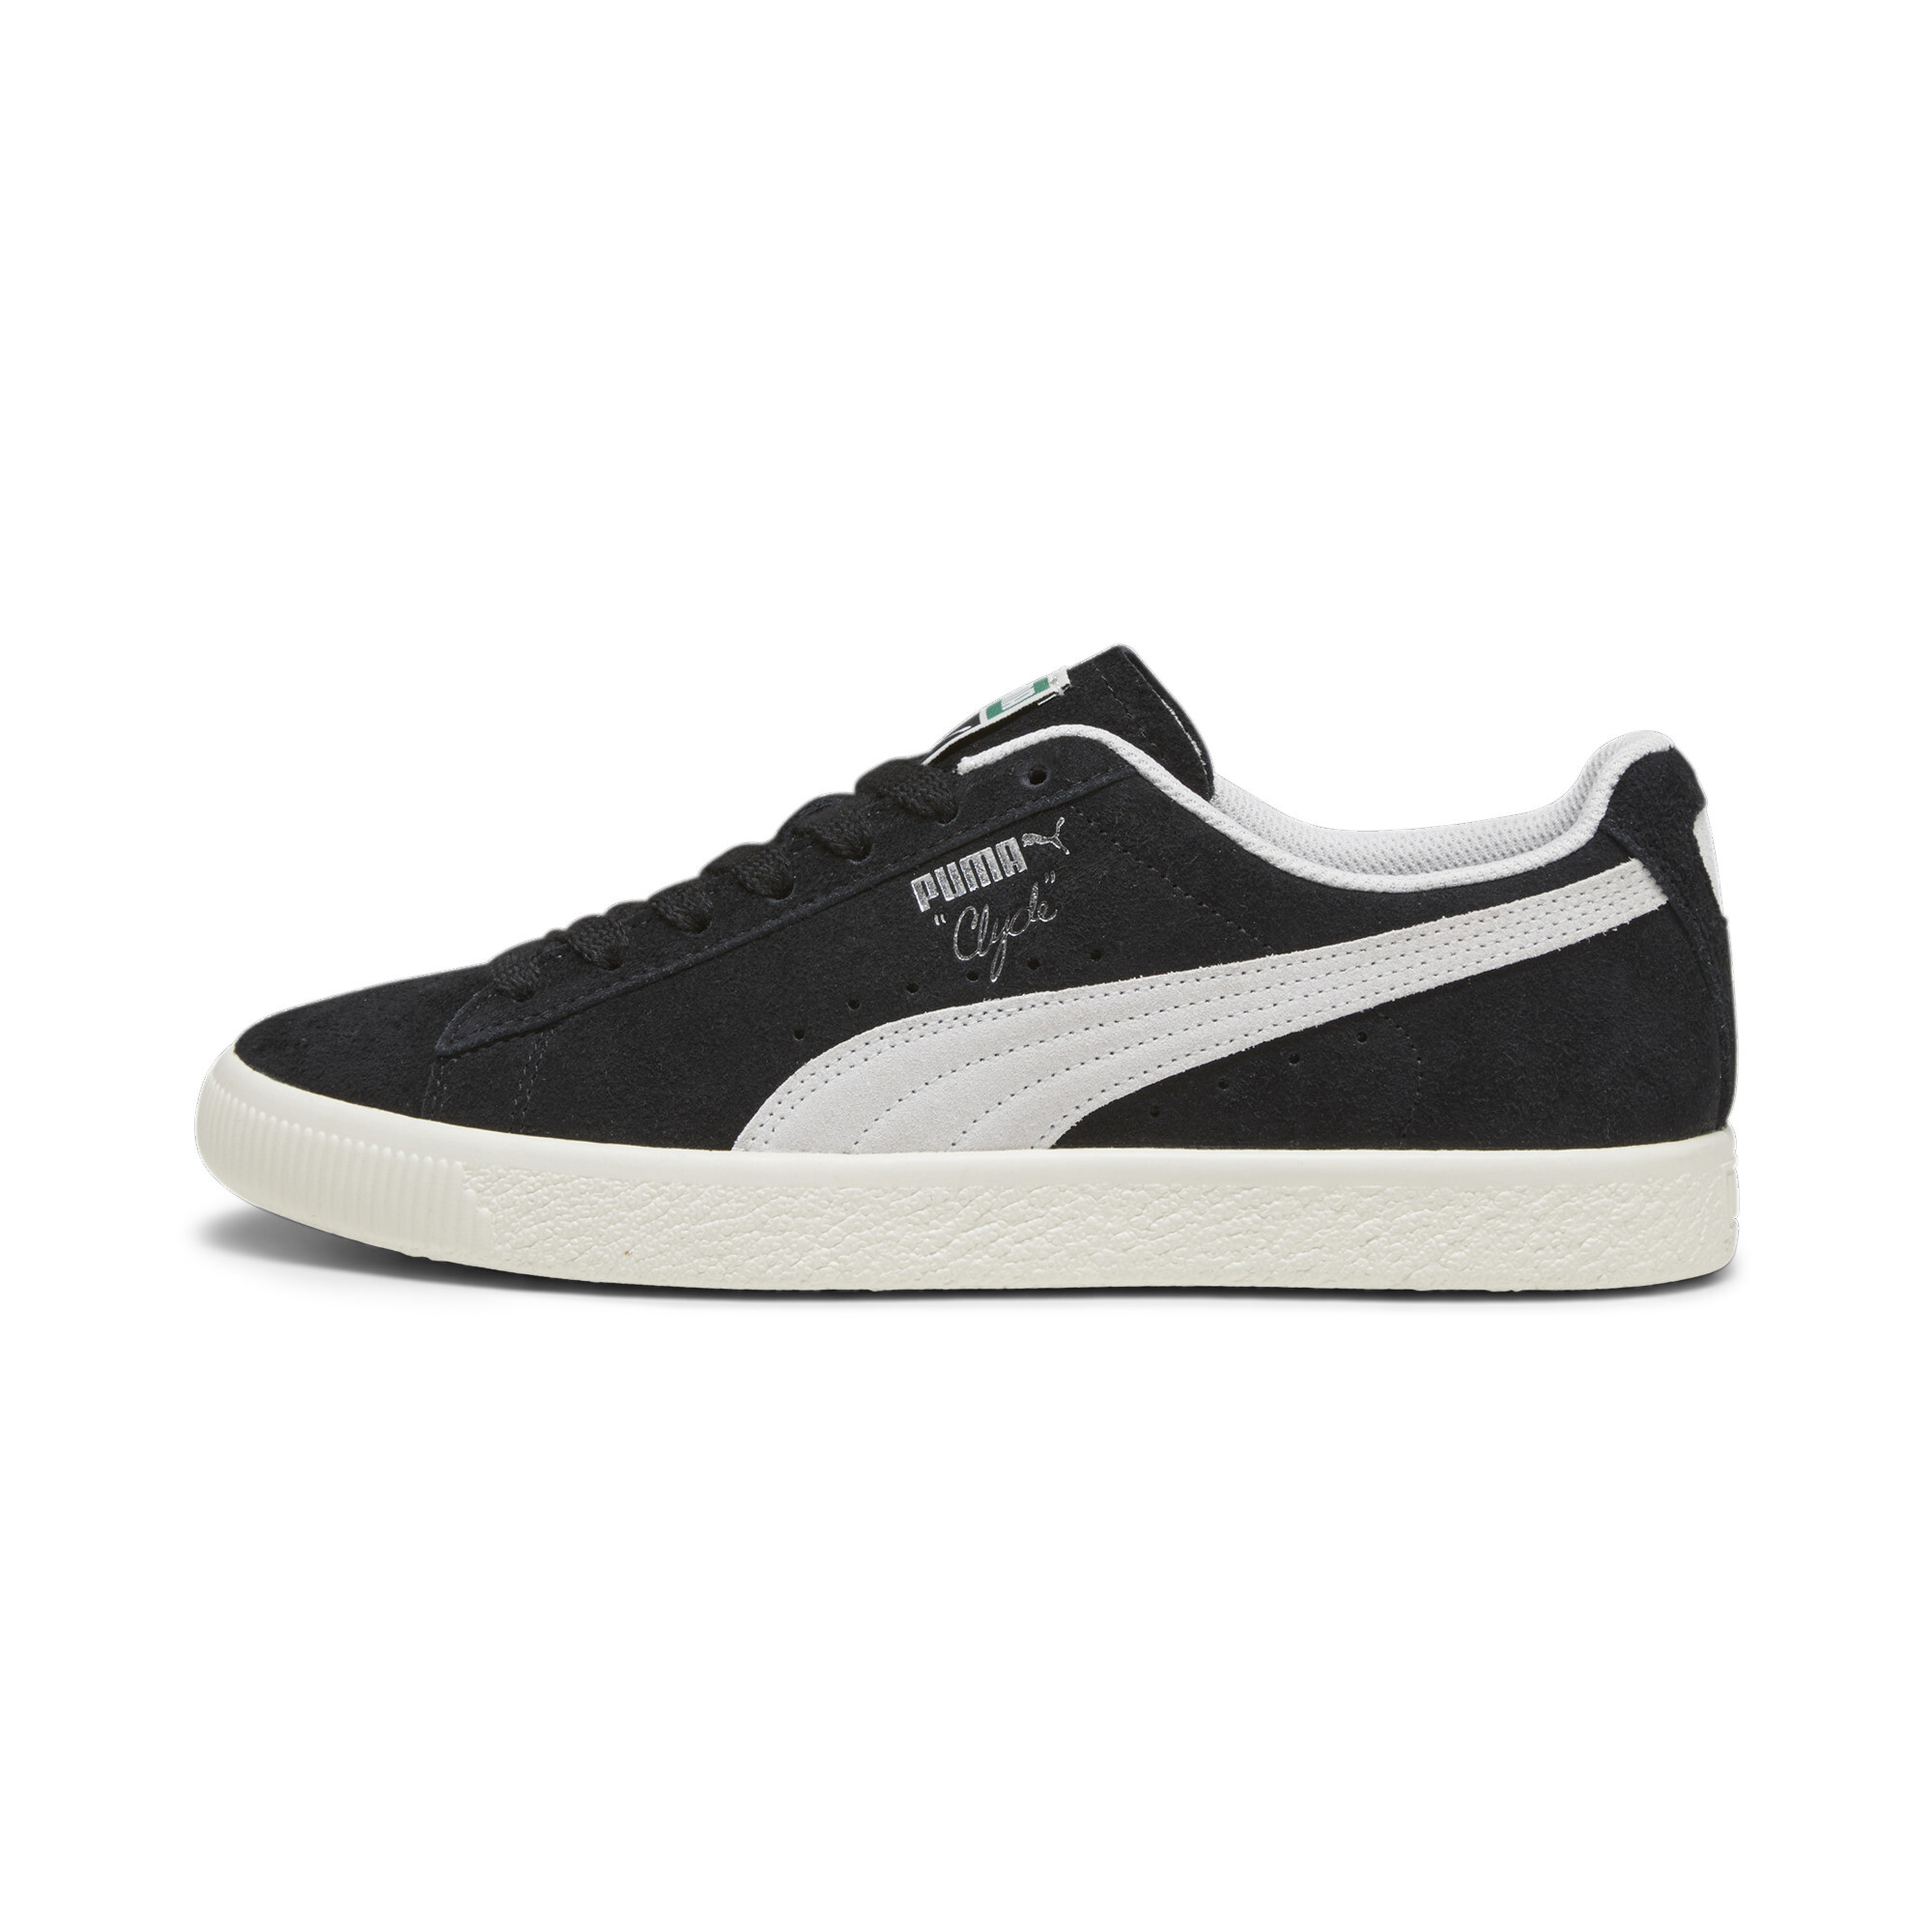 Men's Puma Clyde Hairy Suede Sneakers, Black, Size 42.5, Shoes